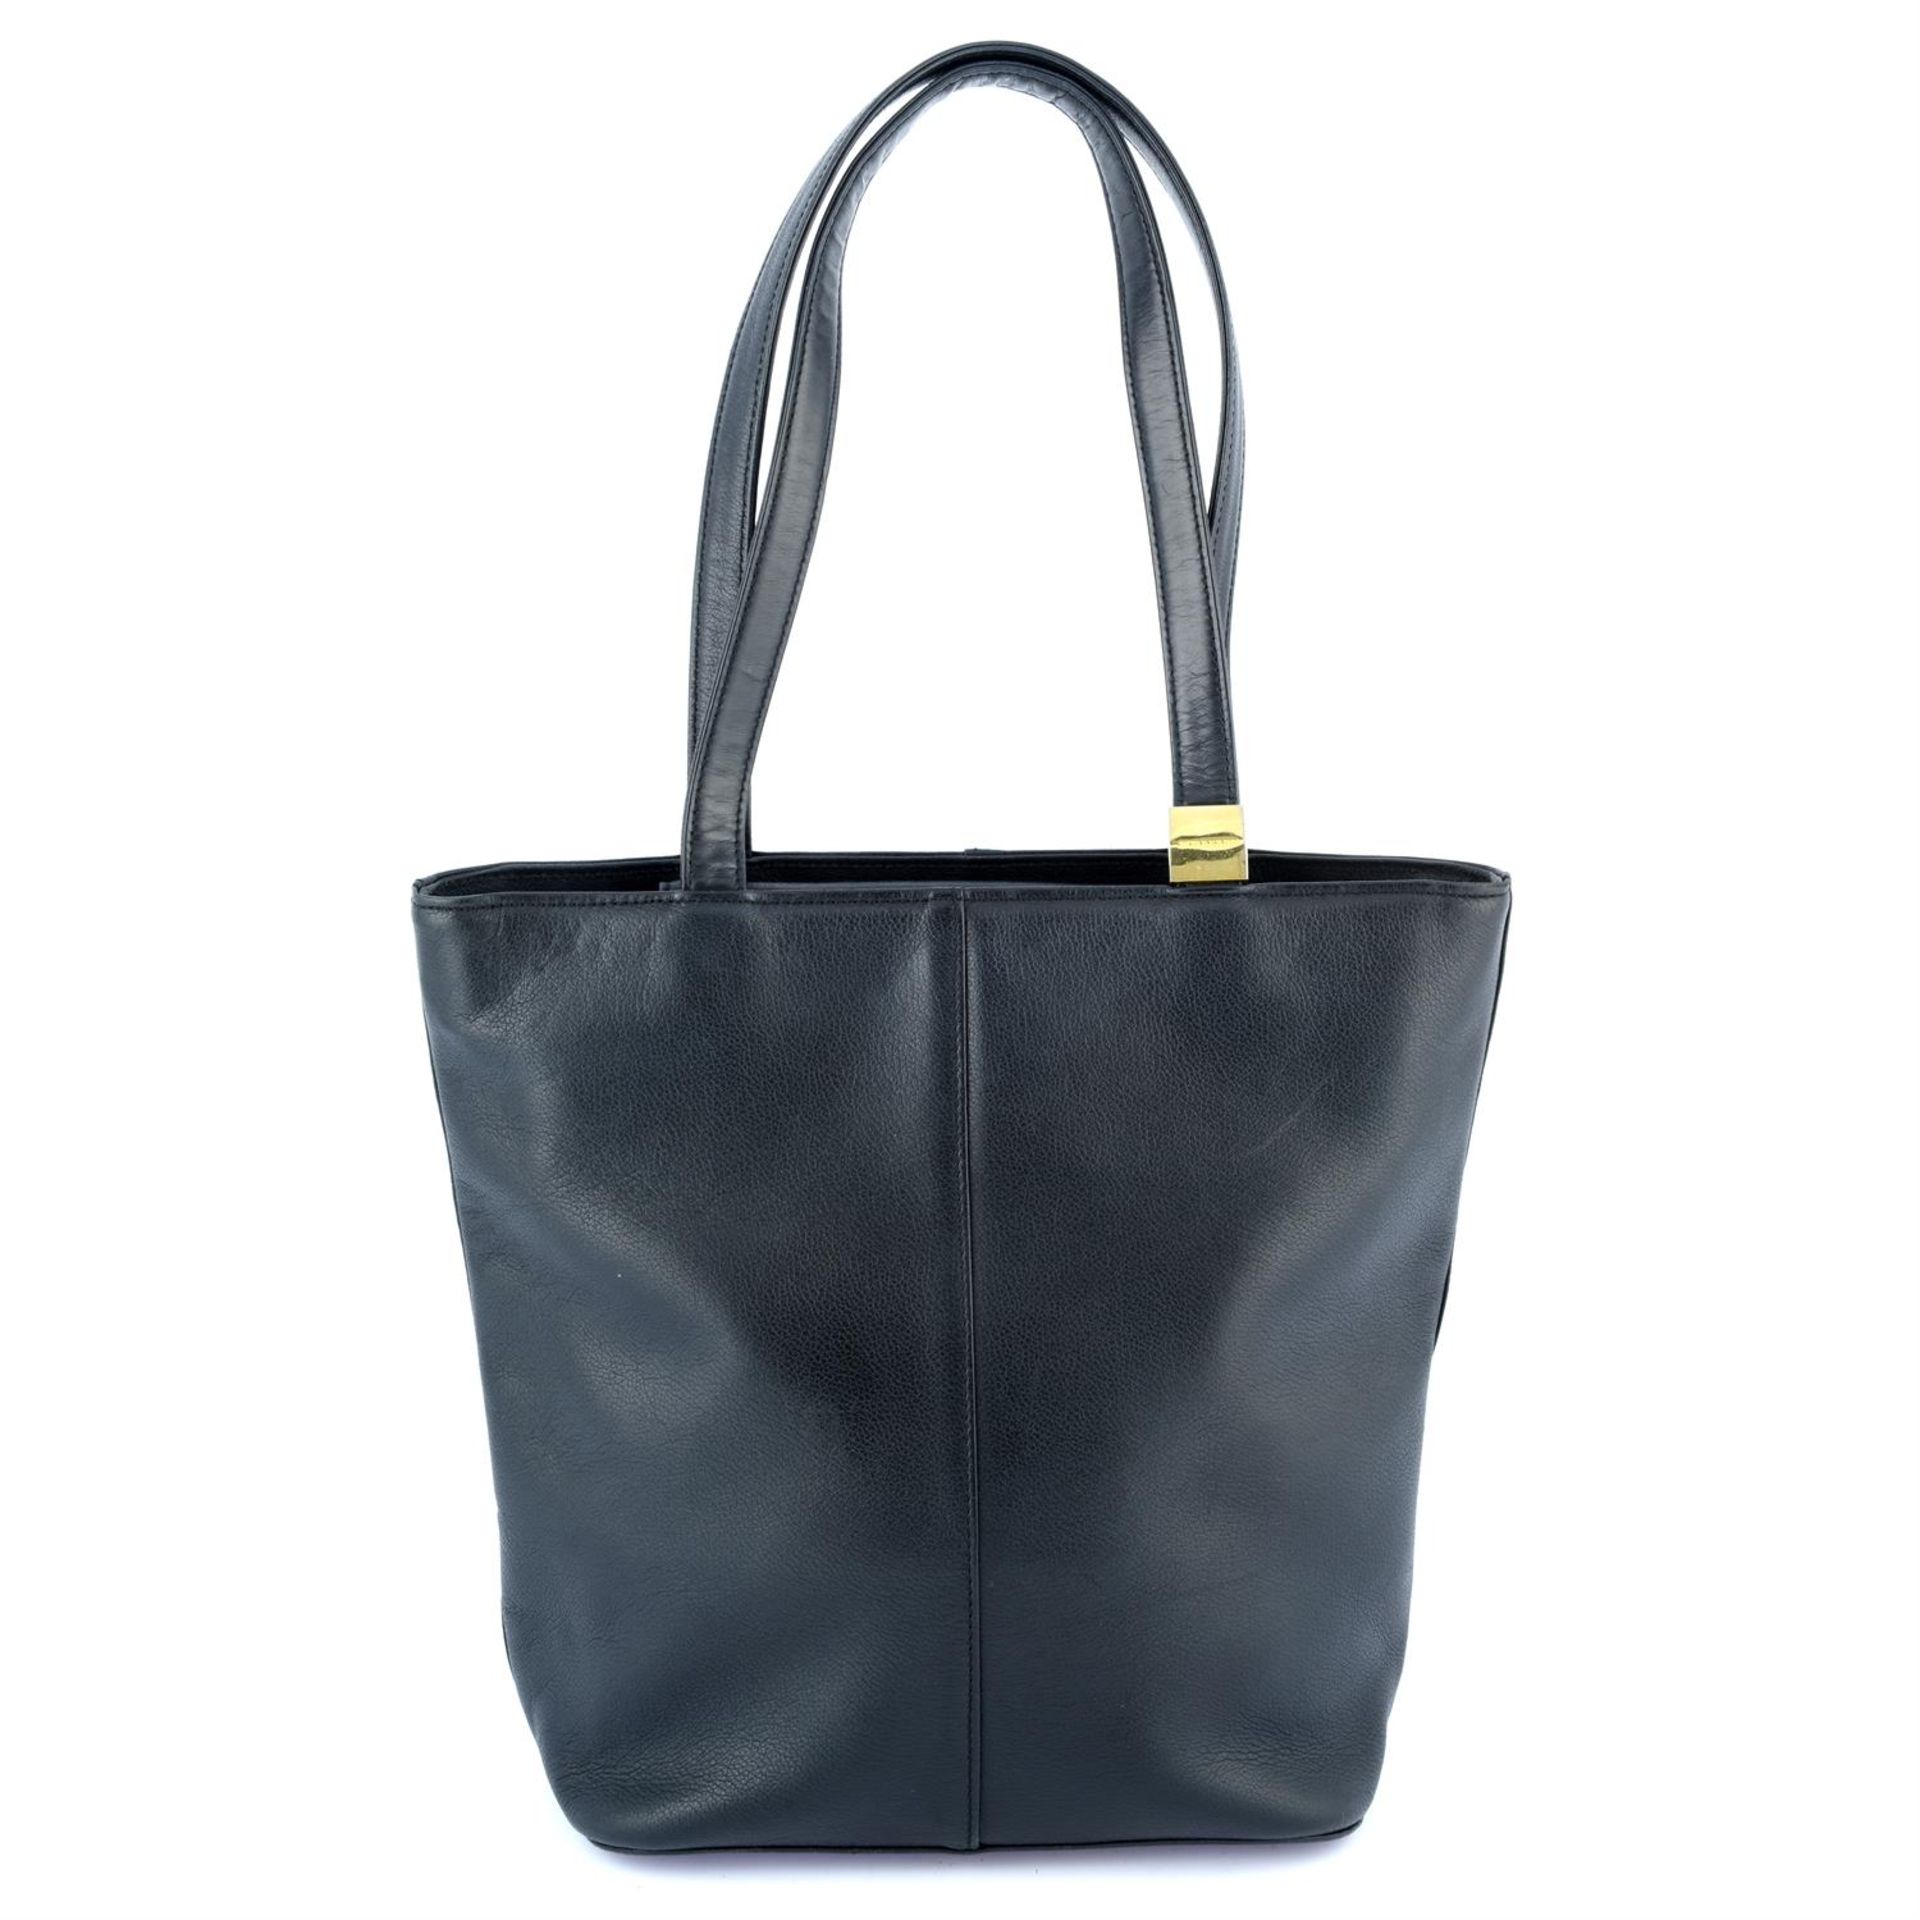 BURBERRY - a black leather tote.